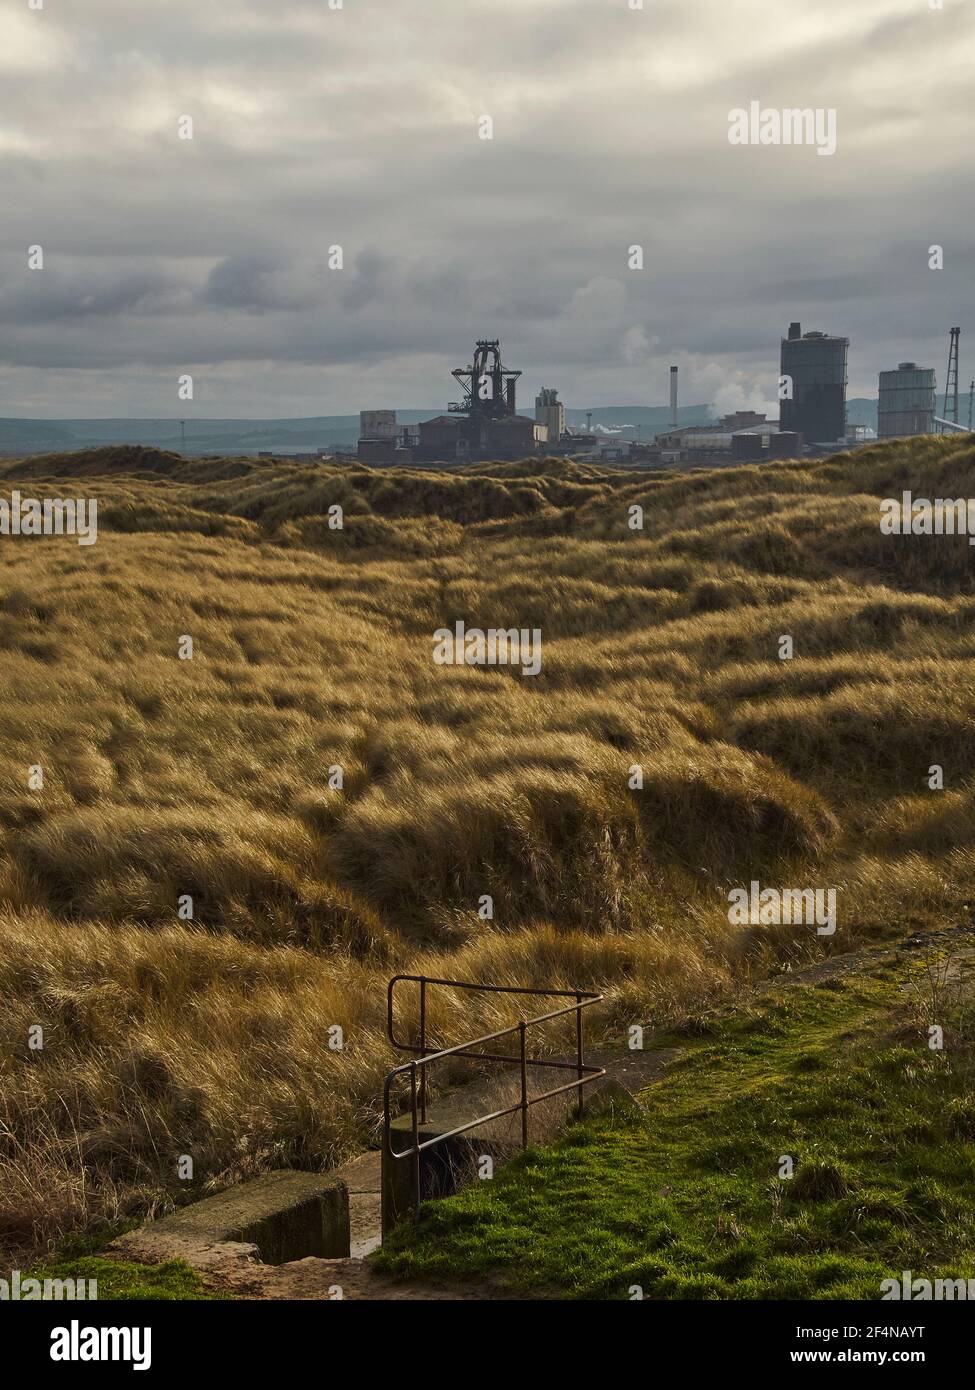 Nature in post-industrial landscape image showing a wide view from South Gare, across grass-covered, wind blown dunes to the derelict steel mill. Stock Photo